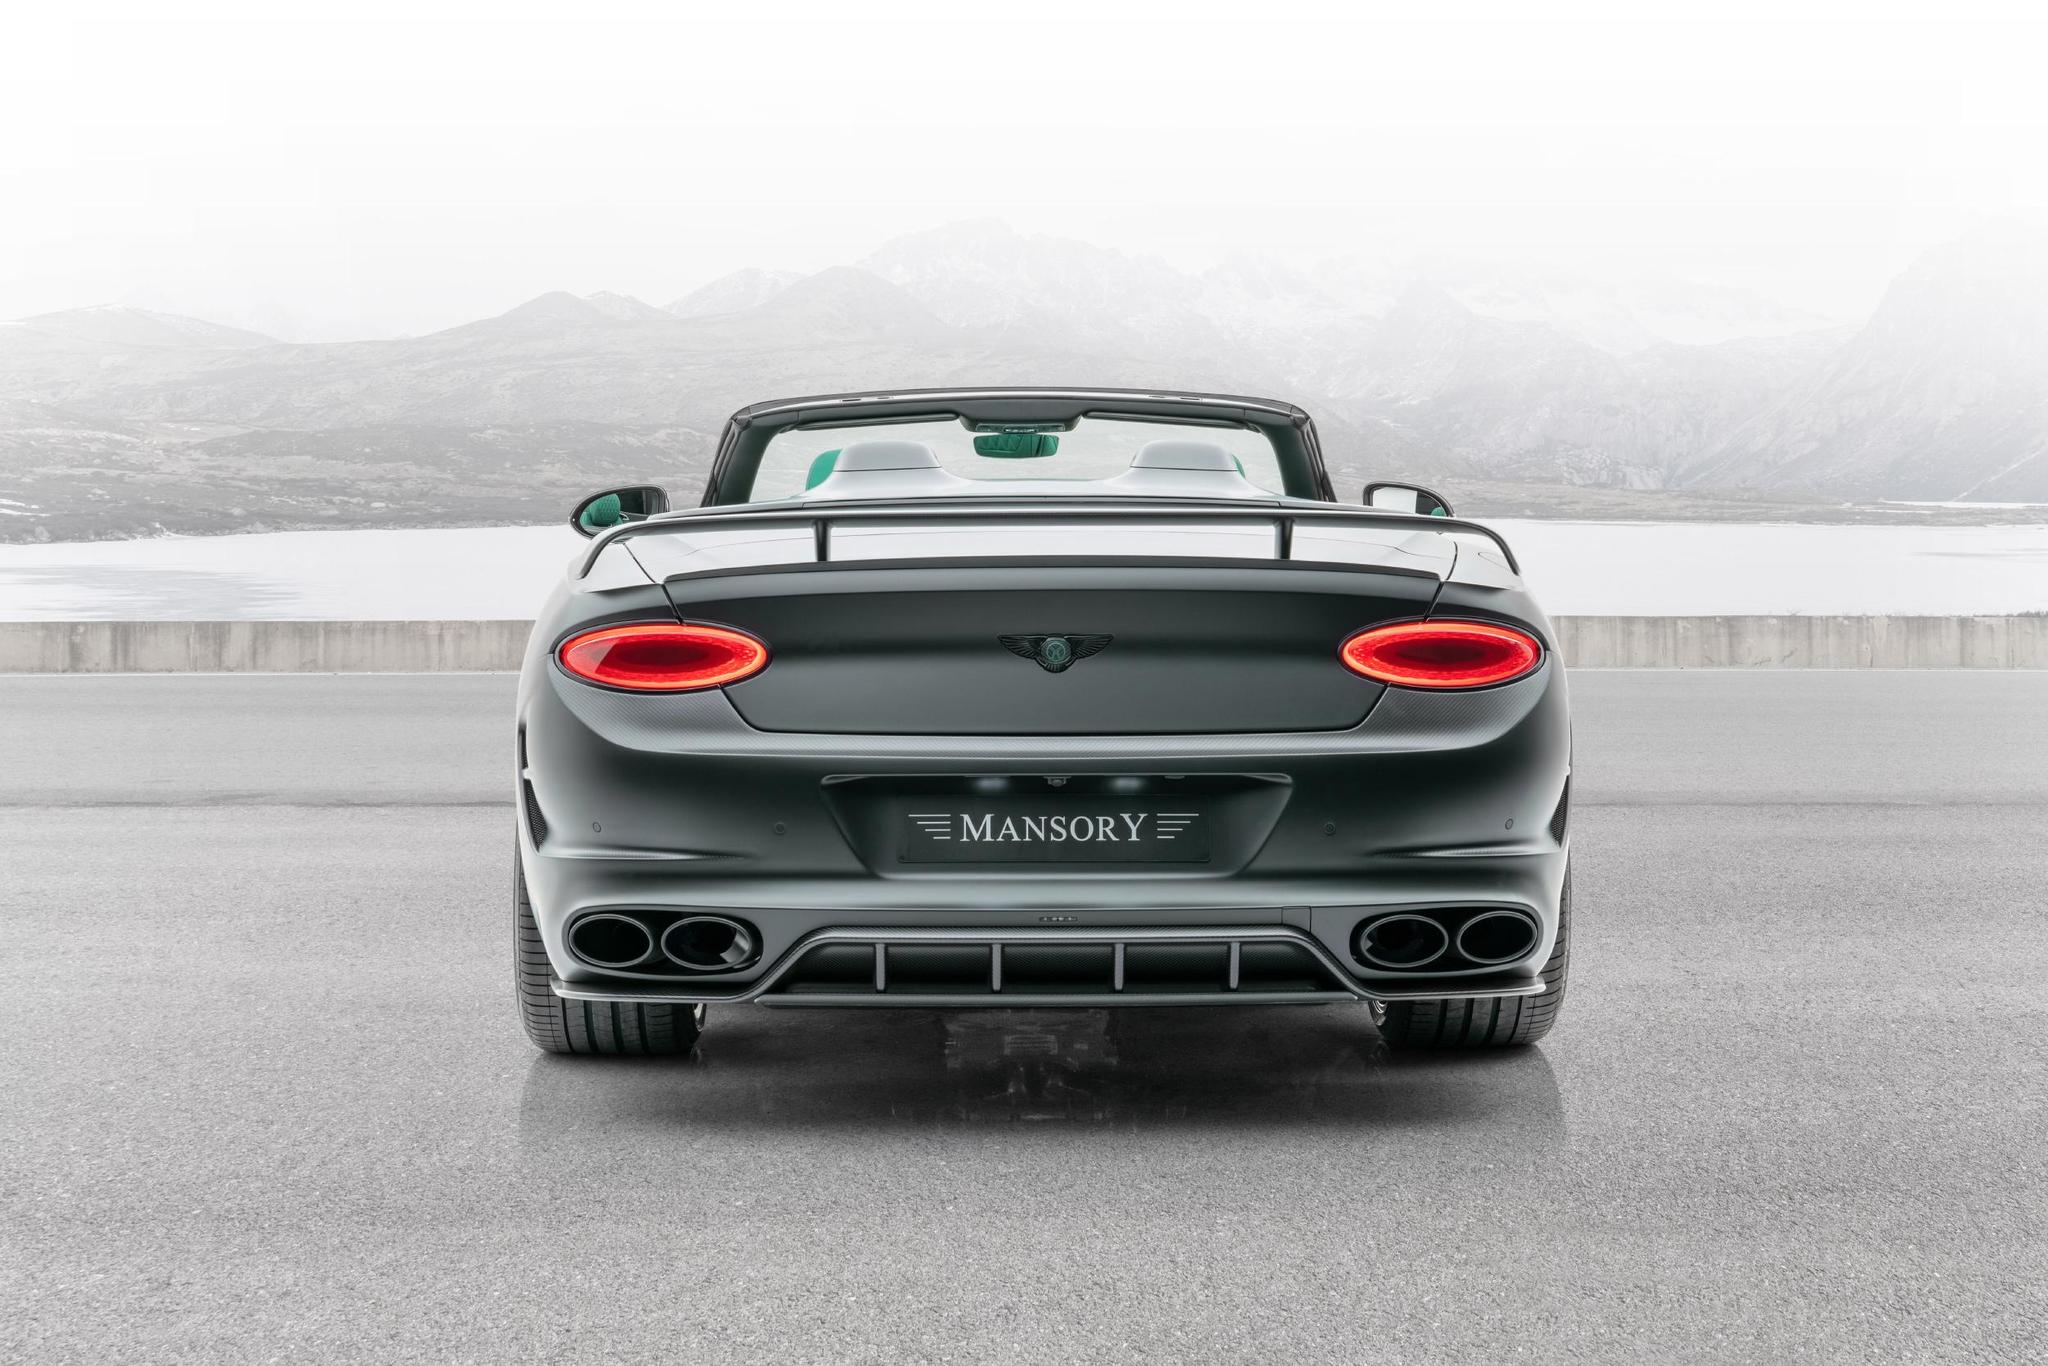 Mansory body kit for Bentley Continental GT new model